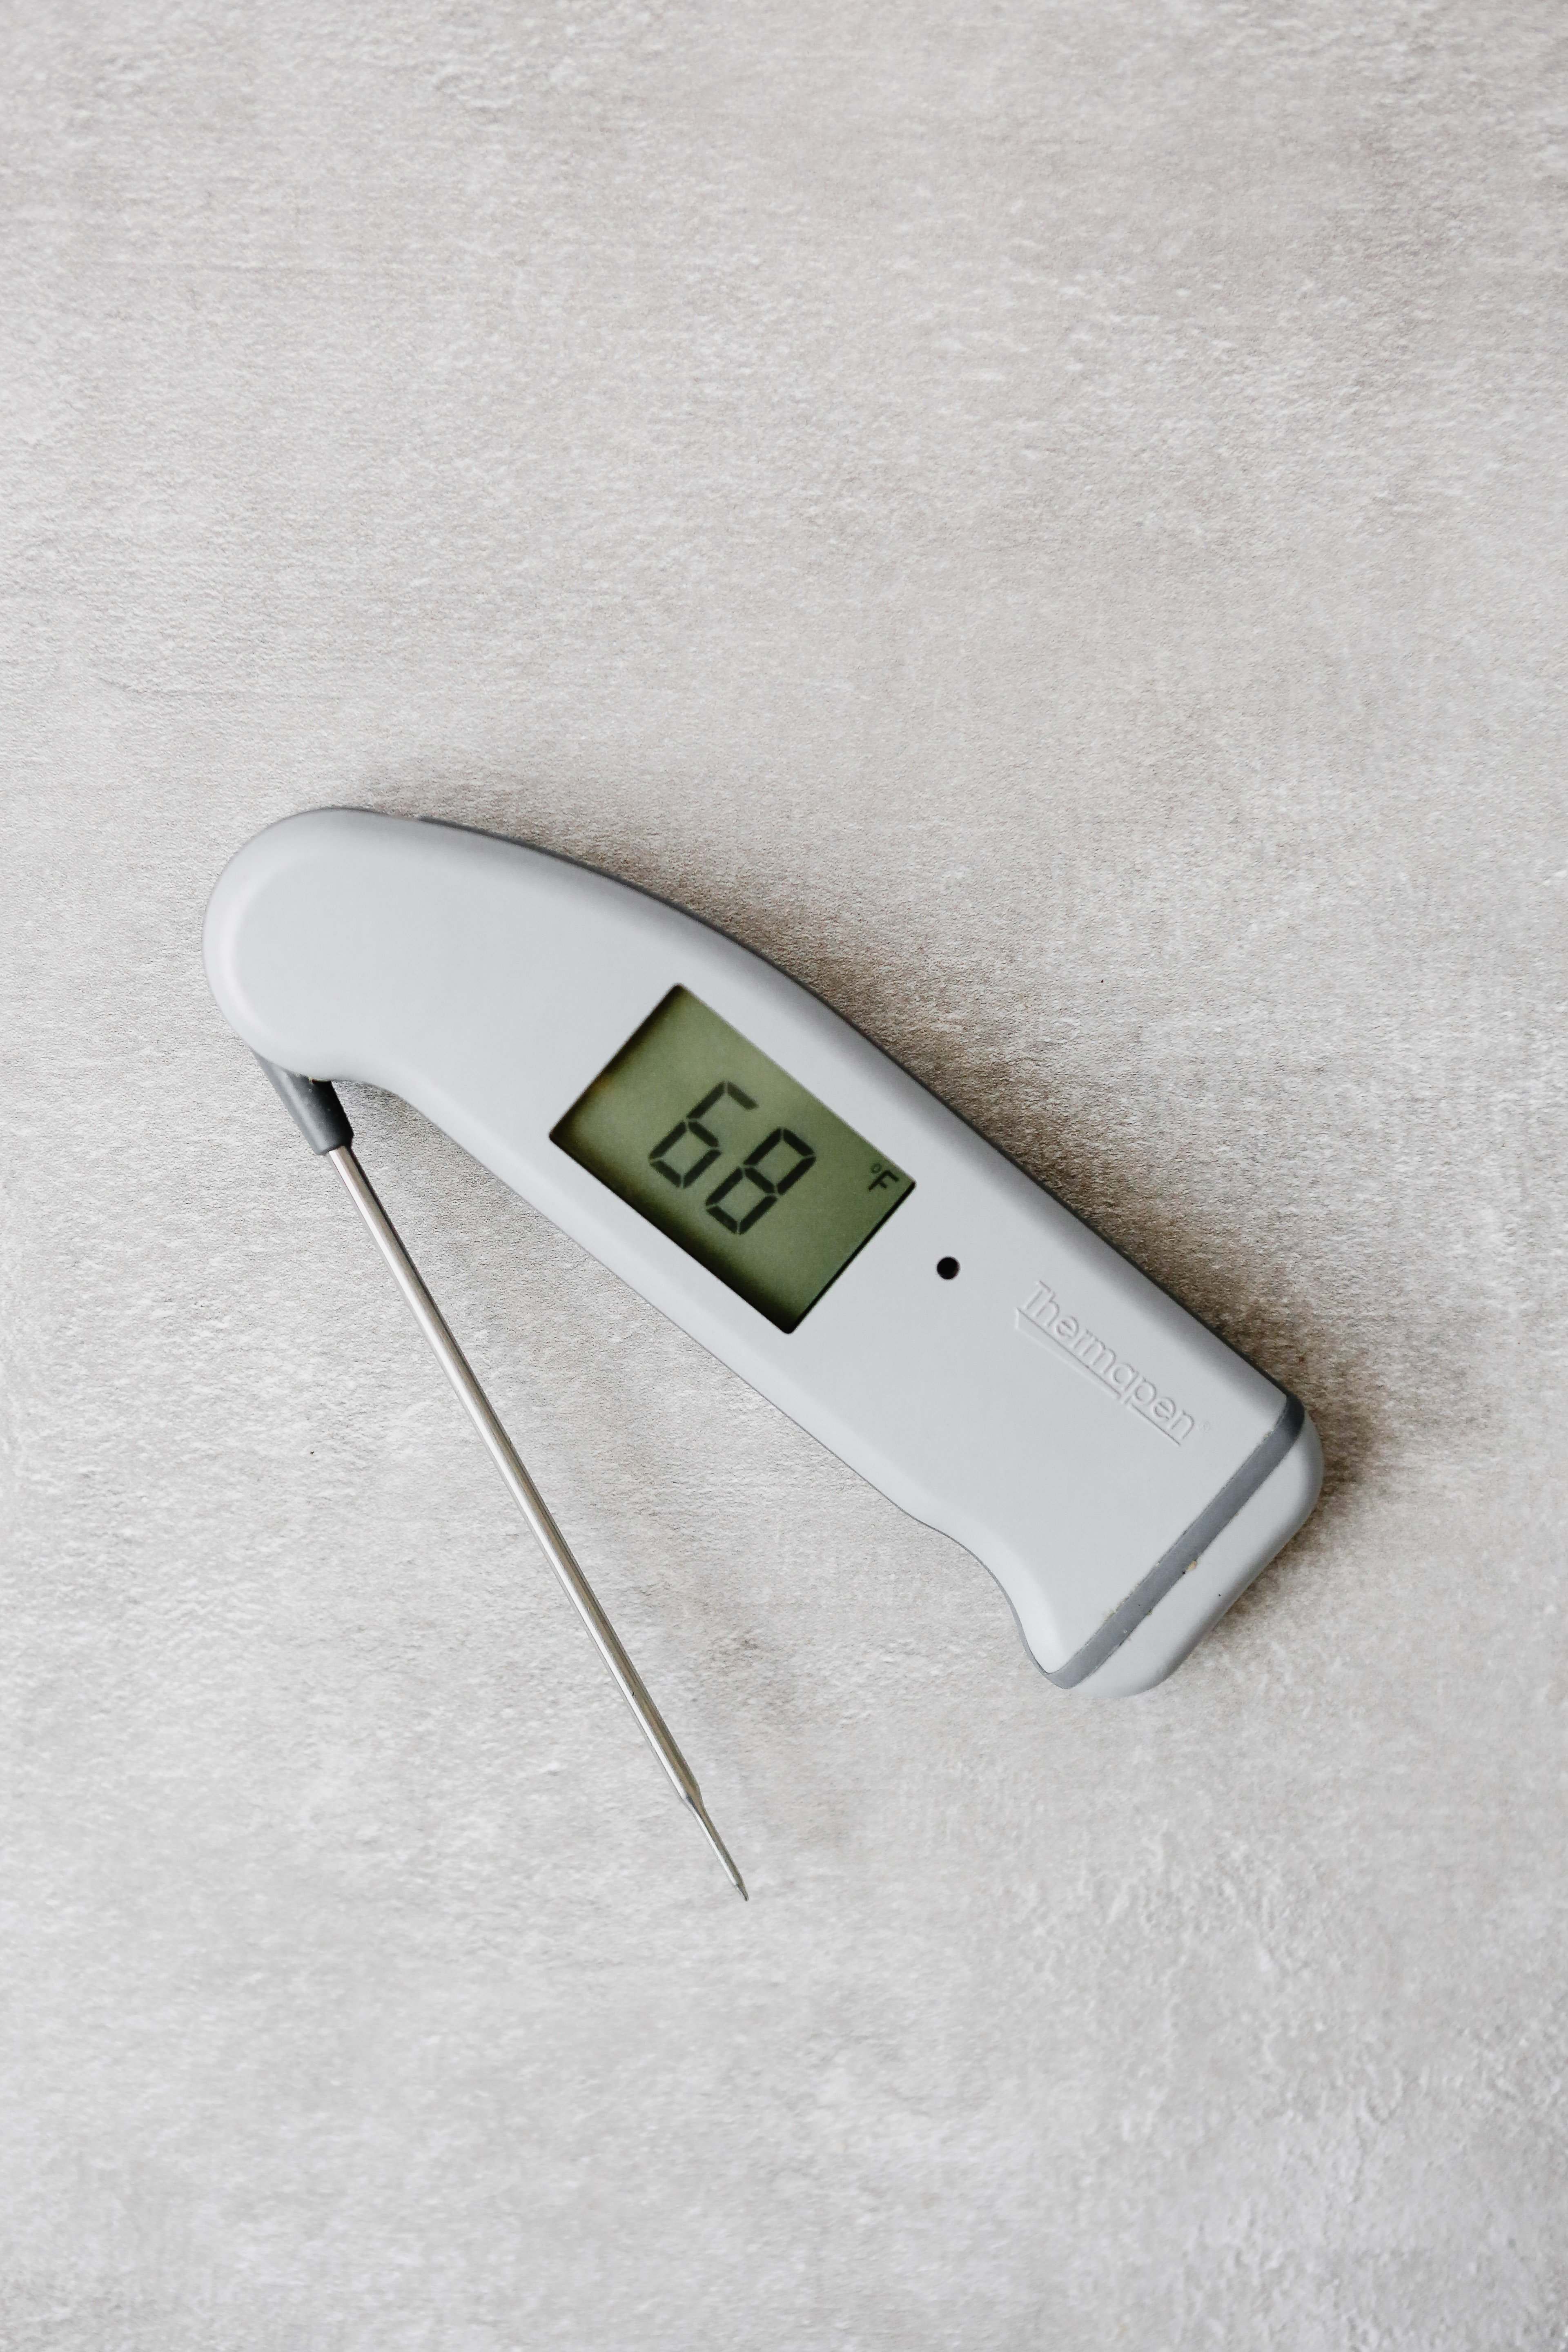 Photograph of a Thermapen thermometer on a gray table 